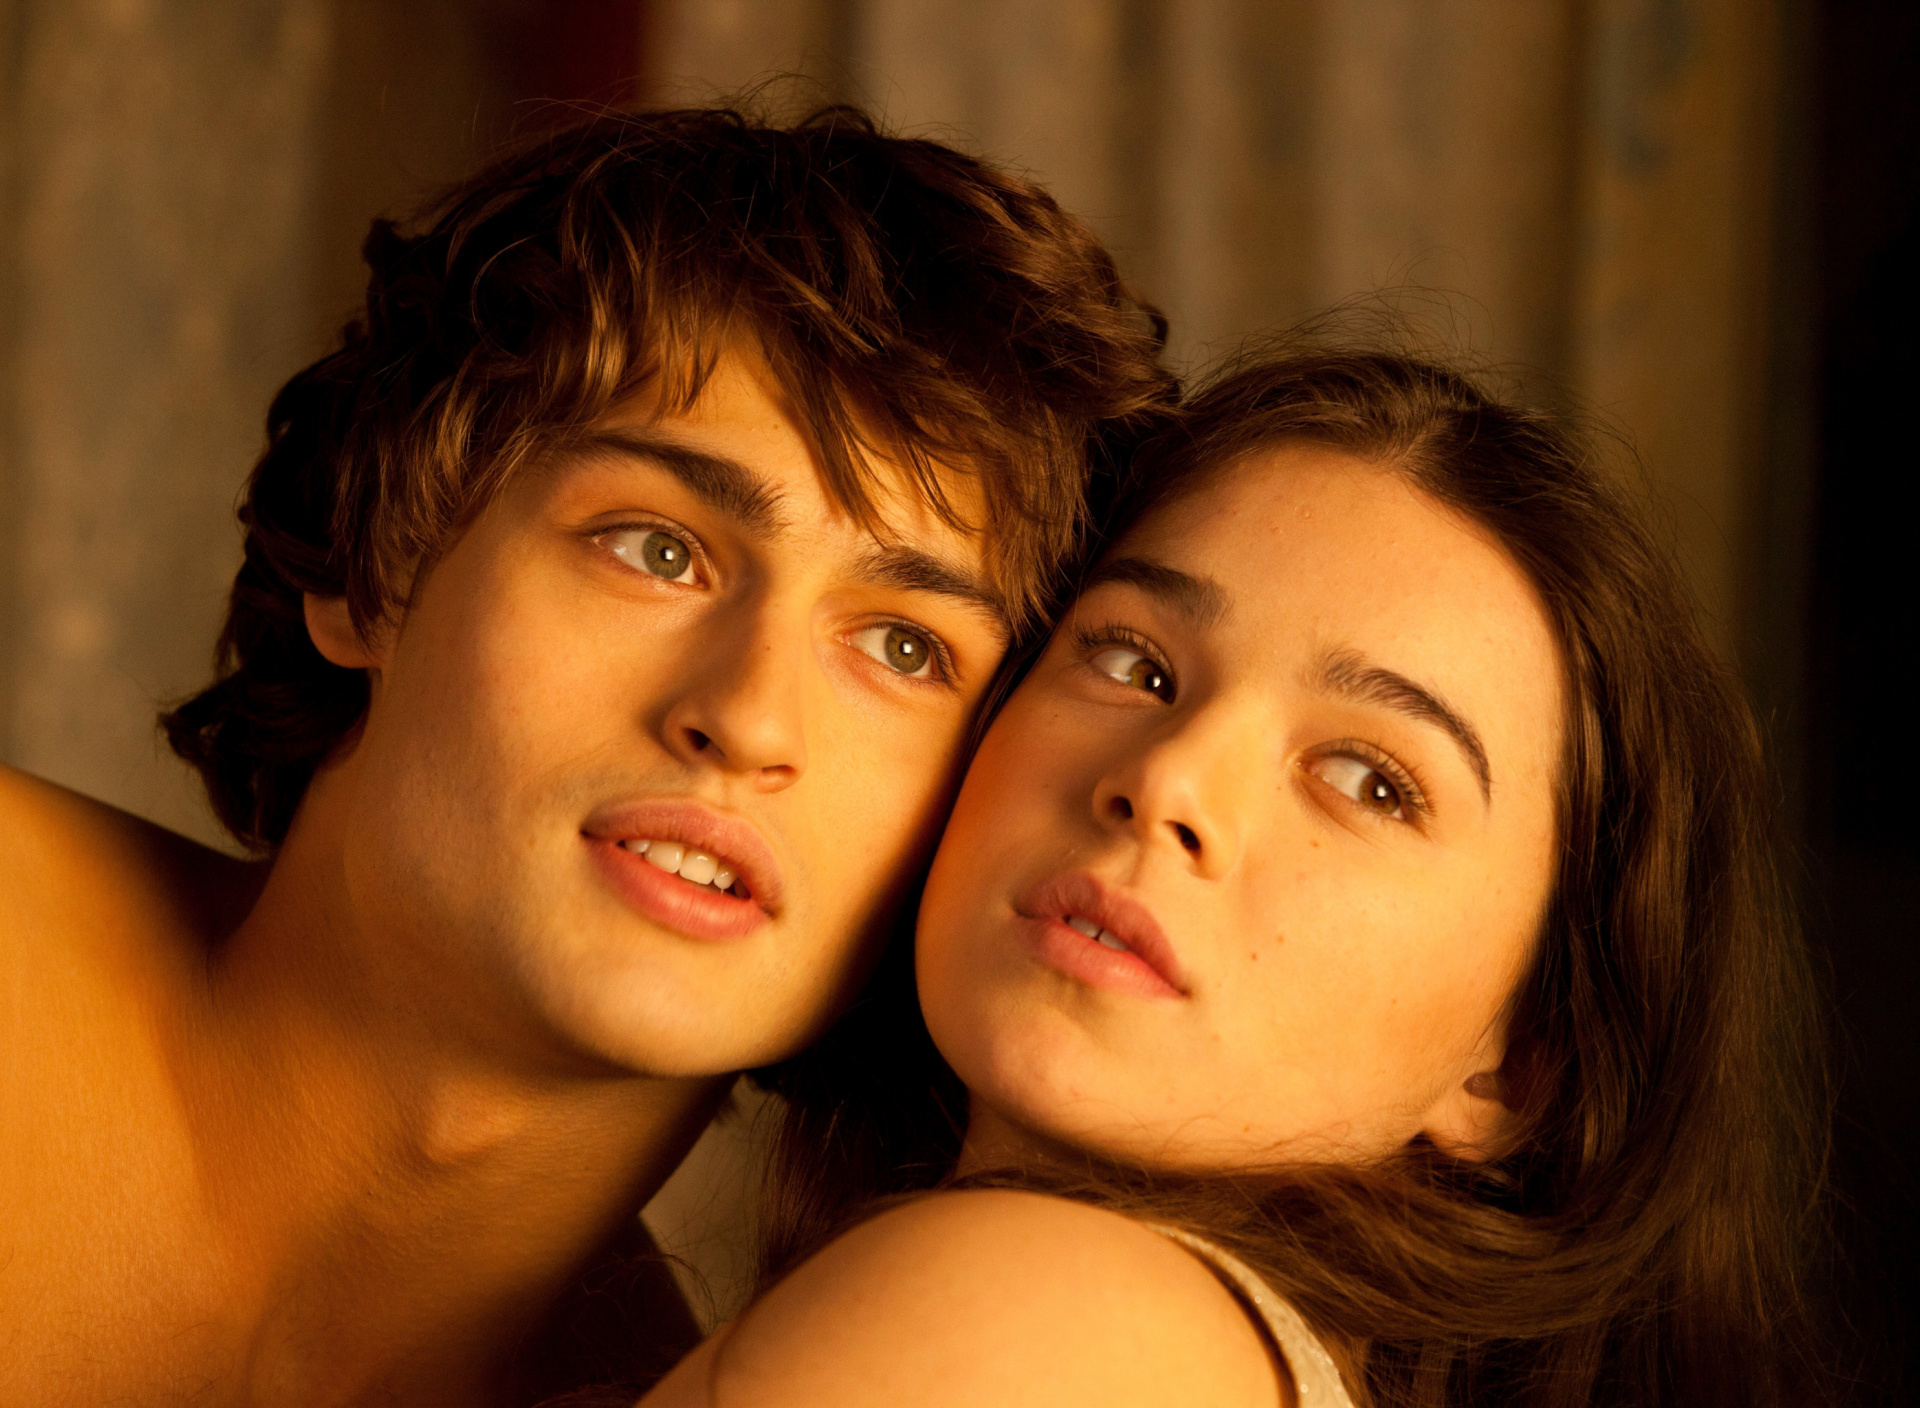 Das Romeo and Juliet with Hailee Steinfeld and Douglas Booth Wallpaper 1920x1408